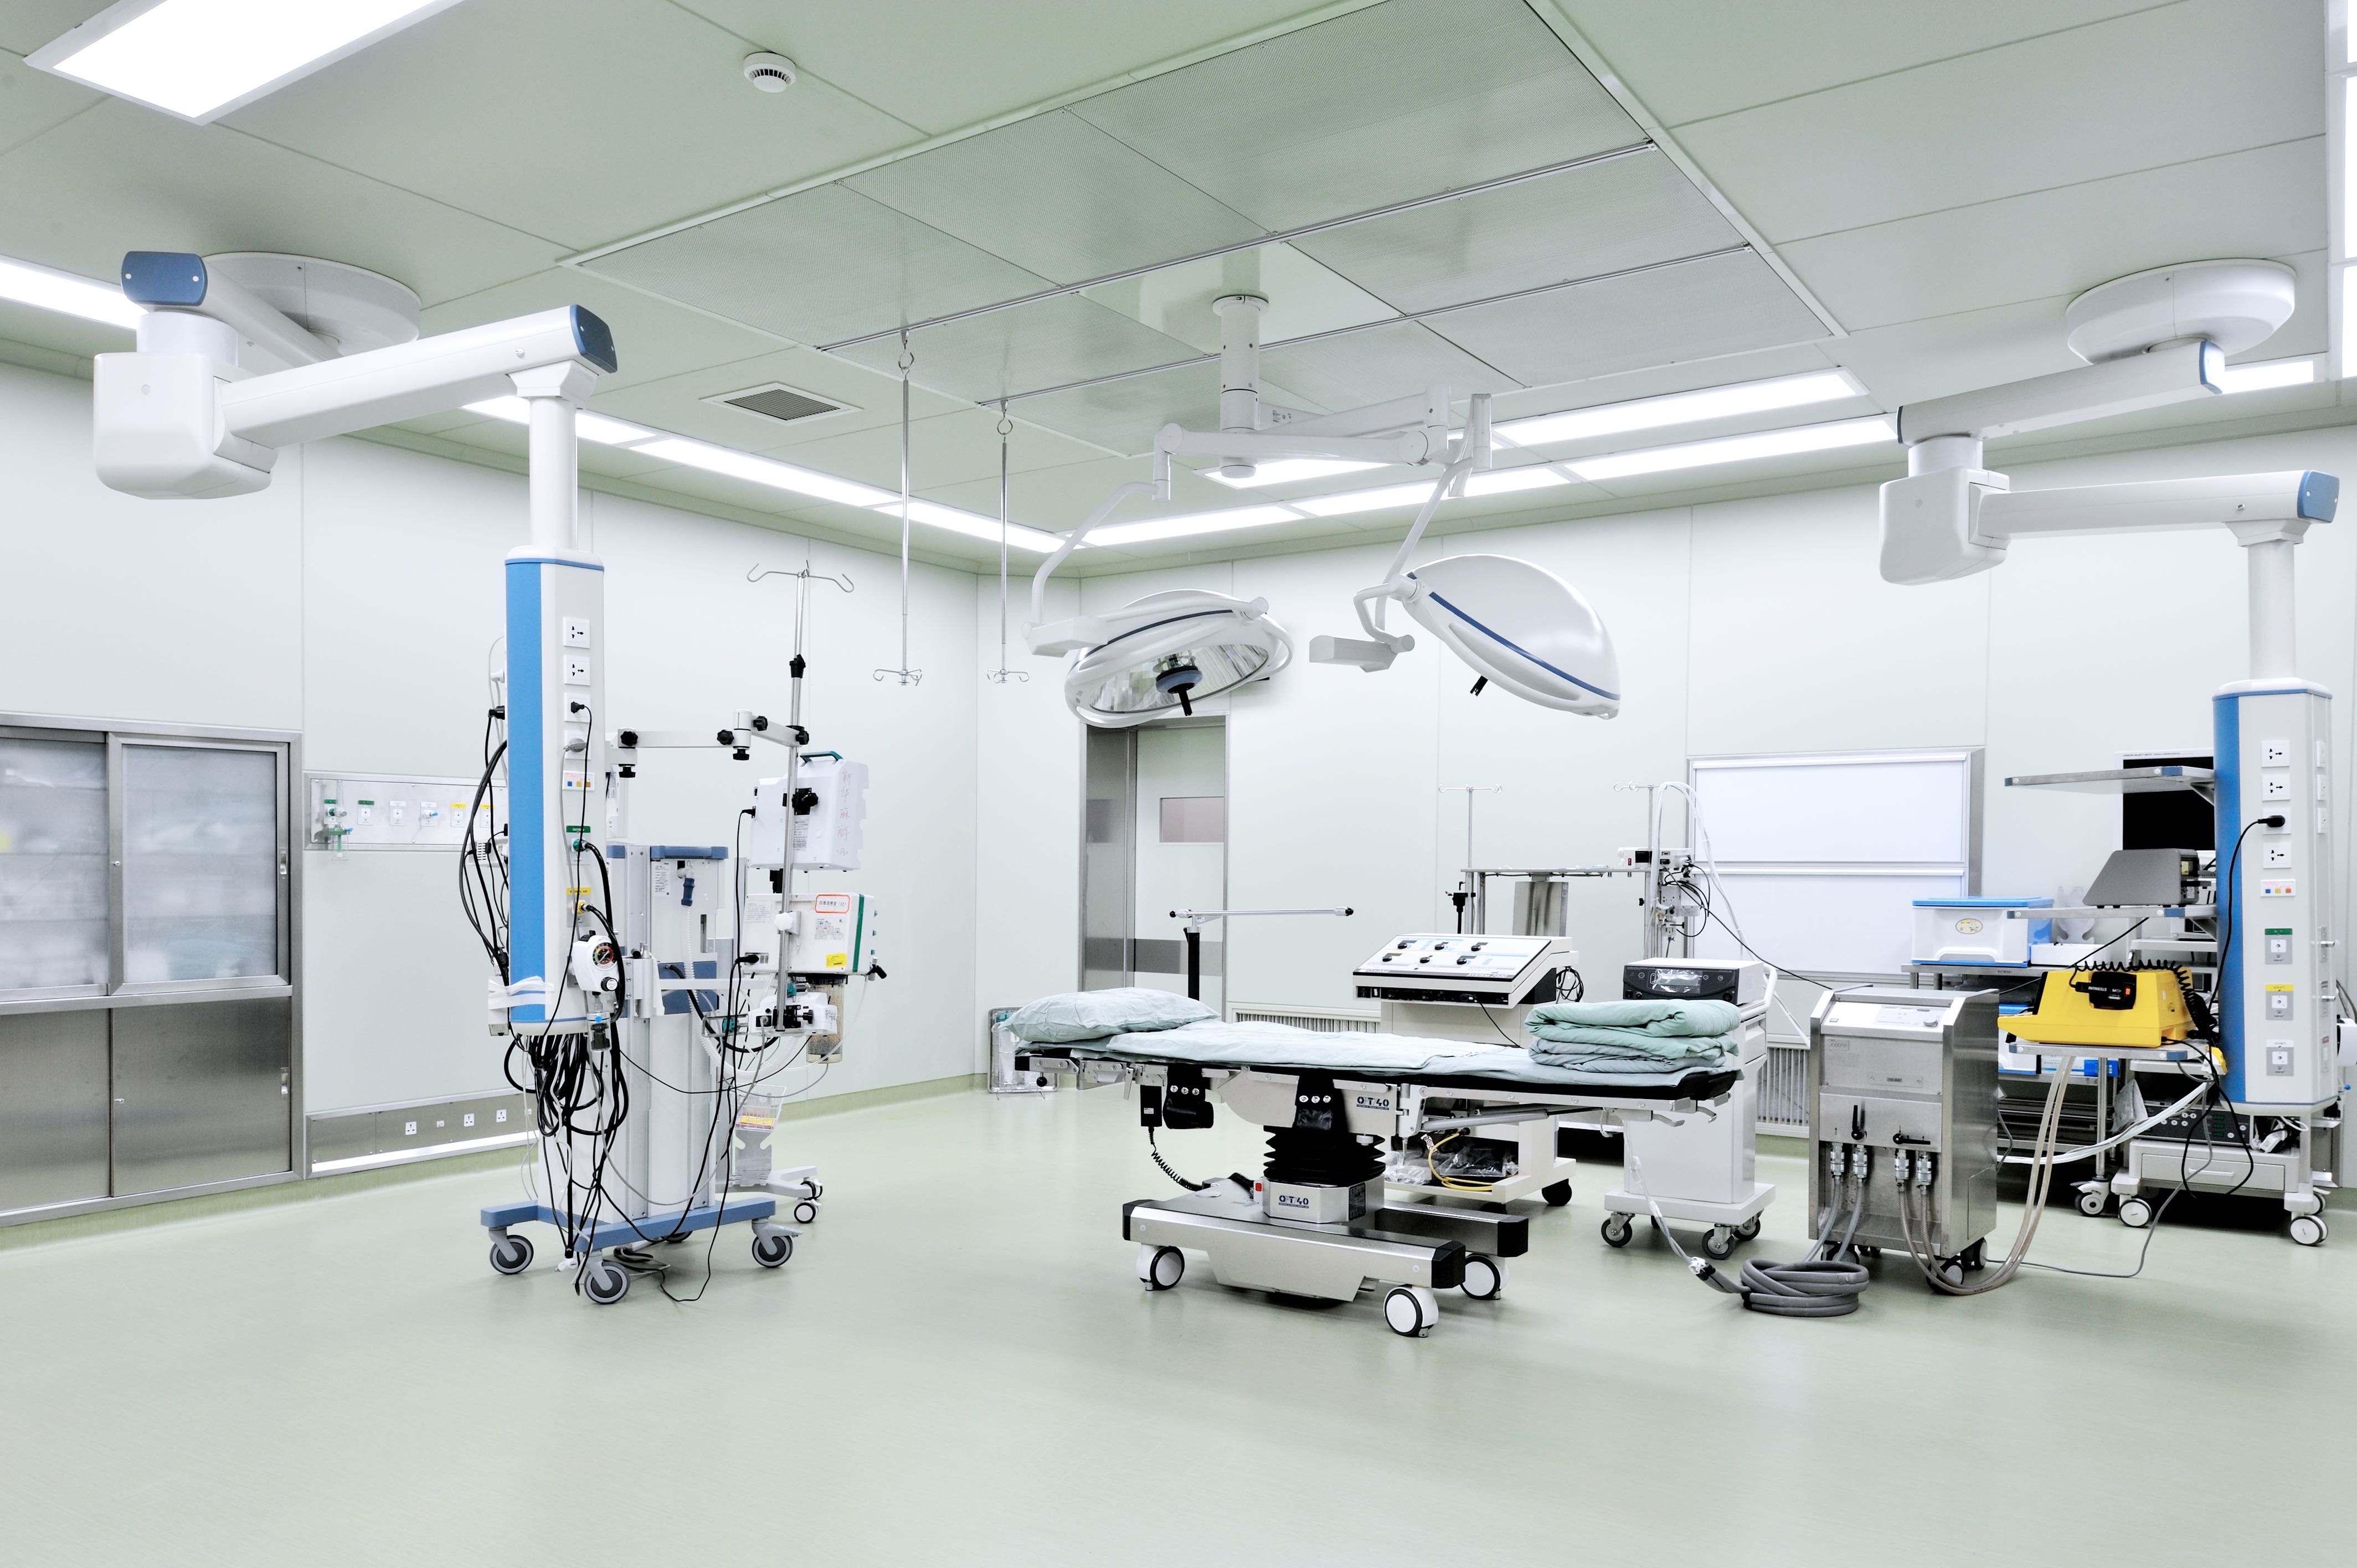 >What are the working principles and technical characteristics of heat pipe in clean operating room?